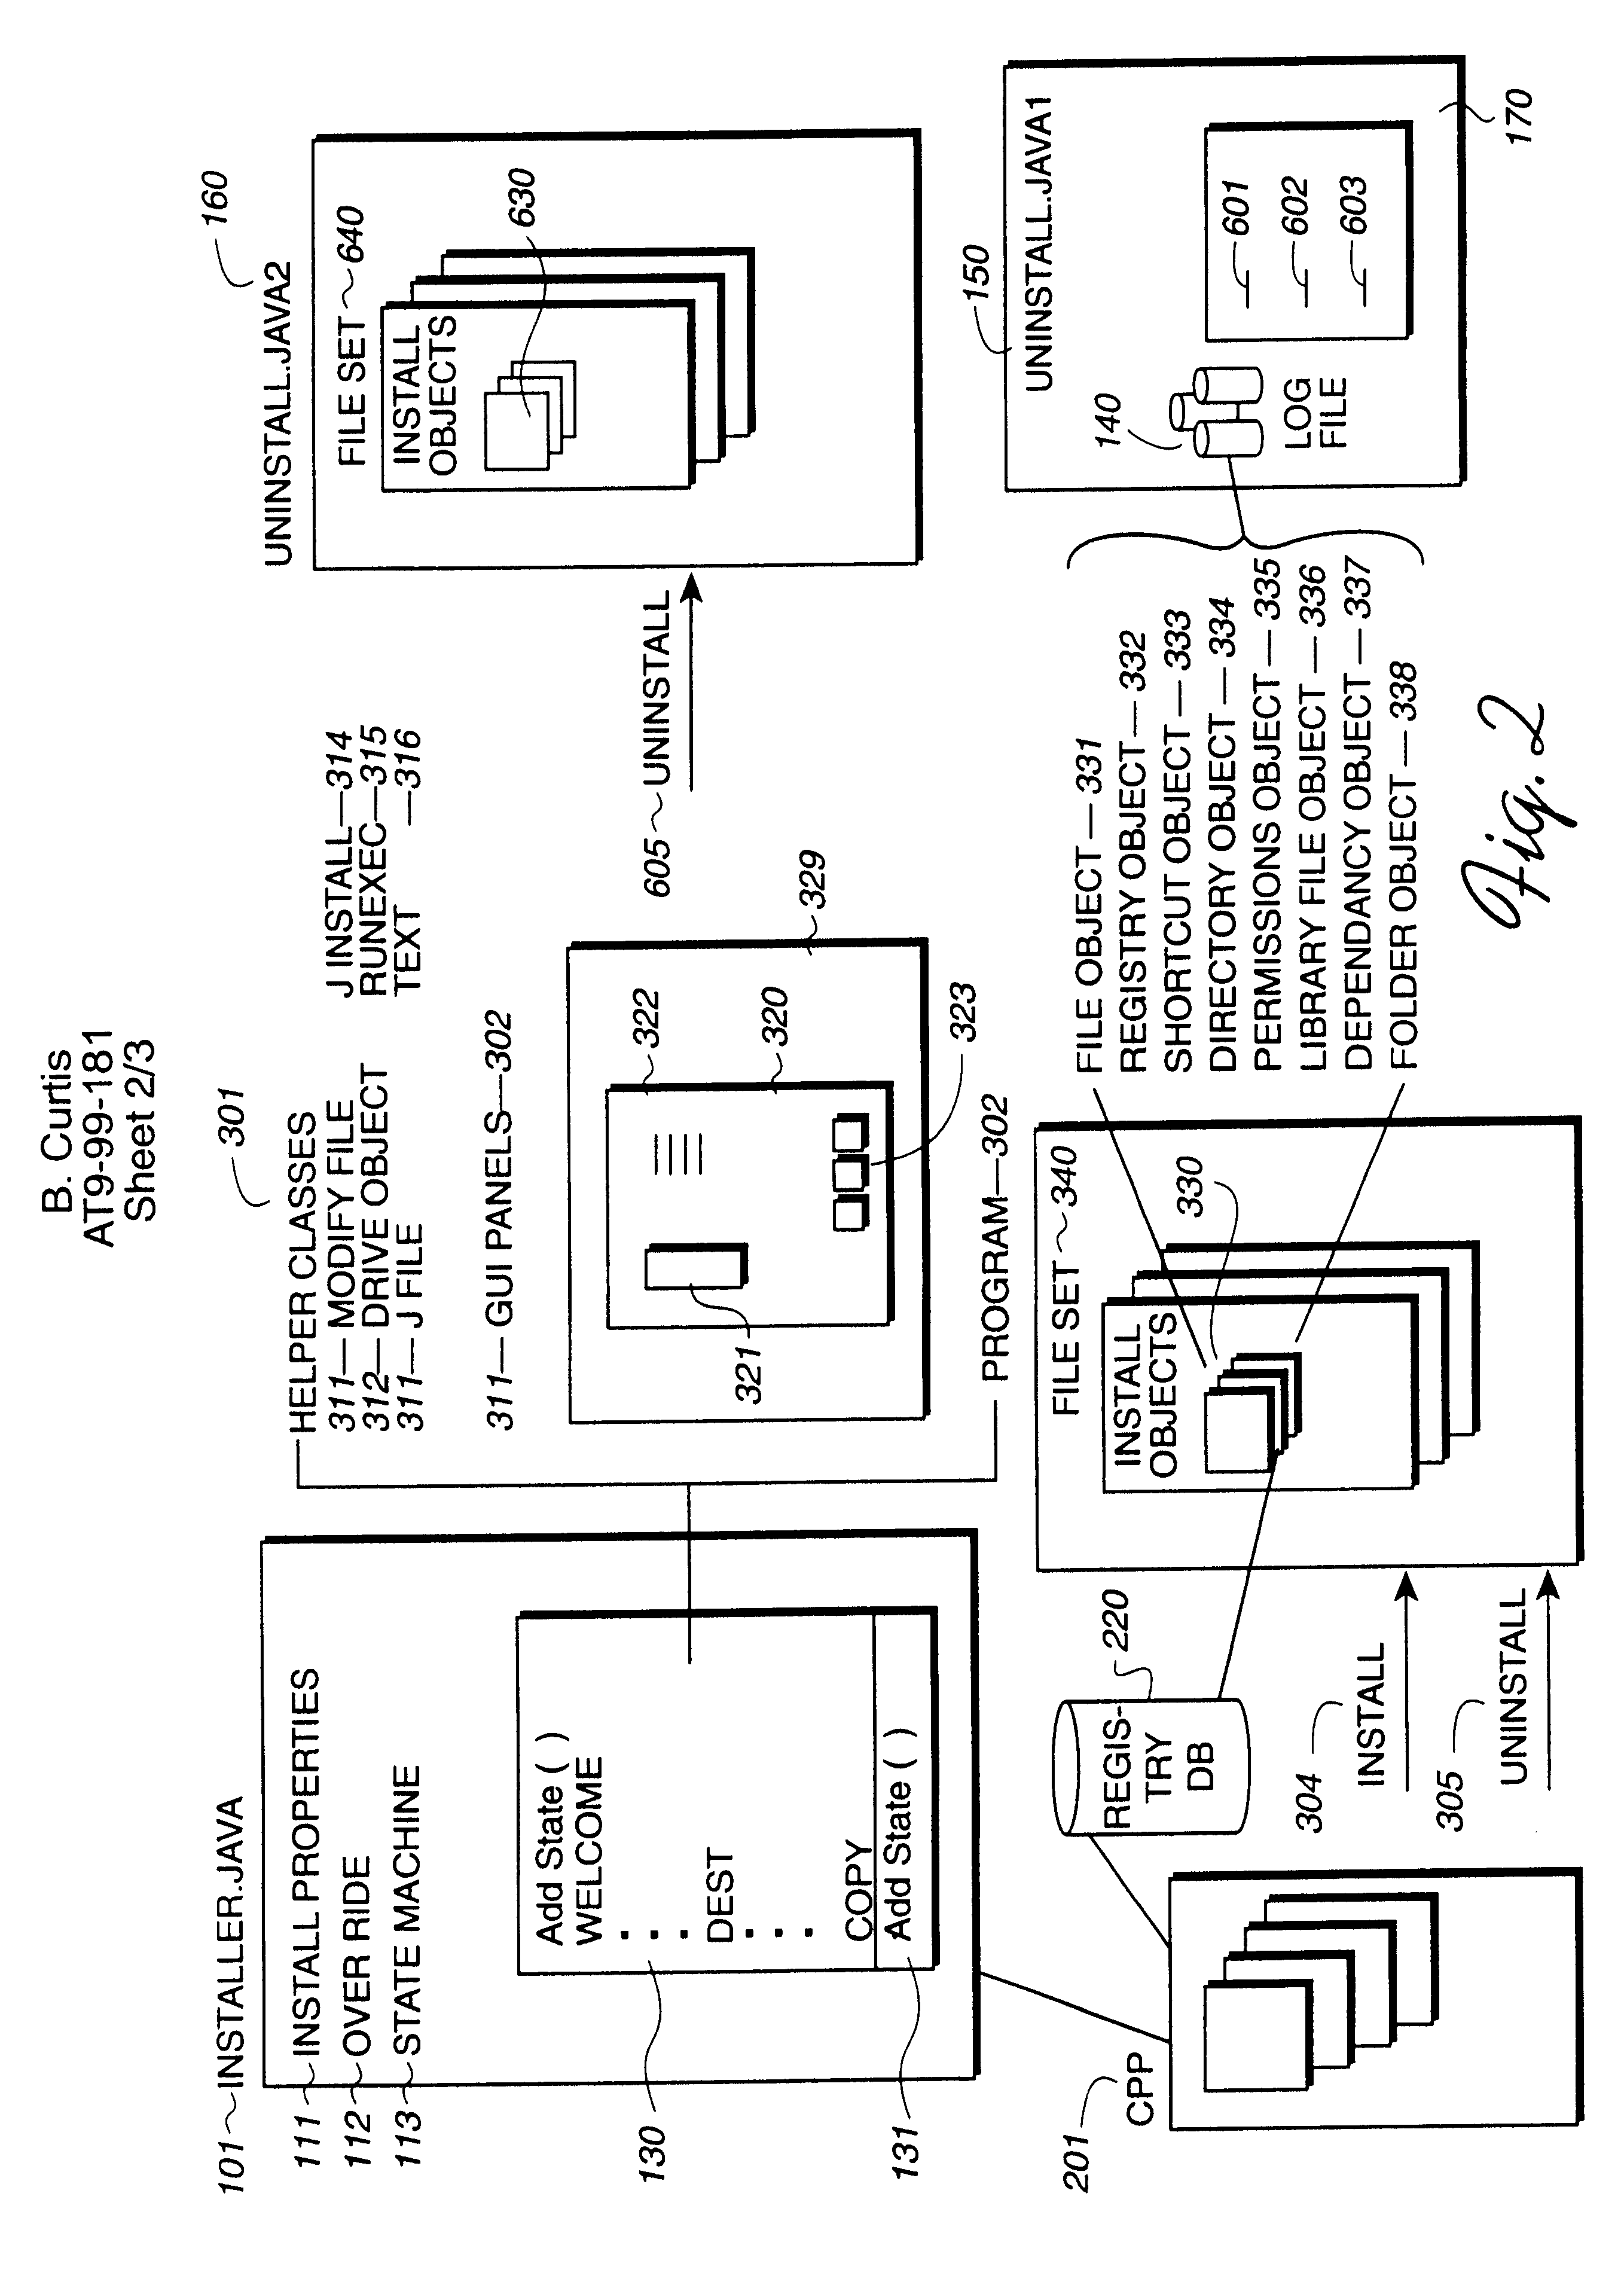 Method, system, and program for generating batch files